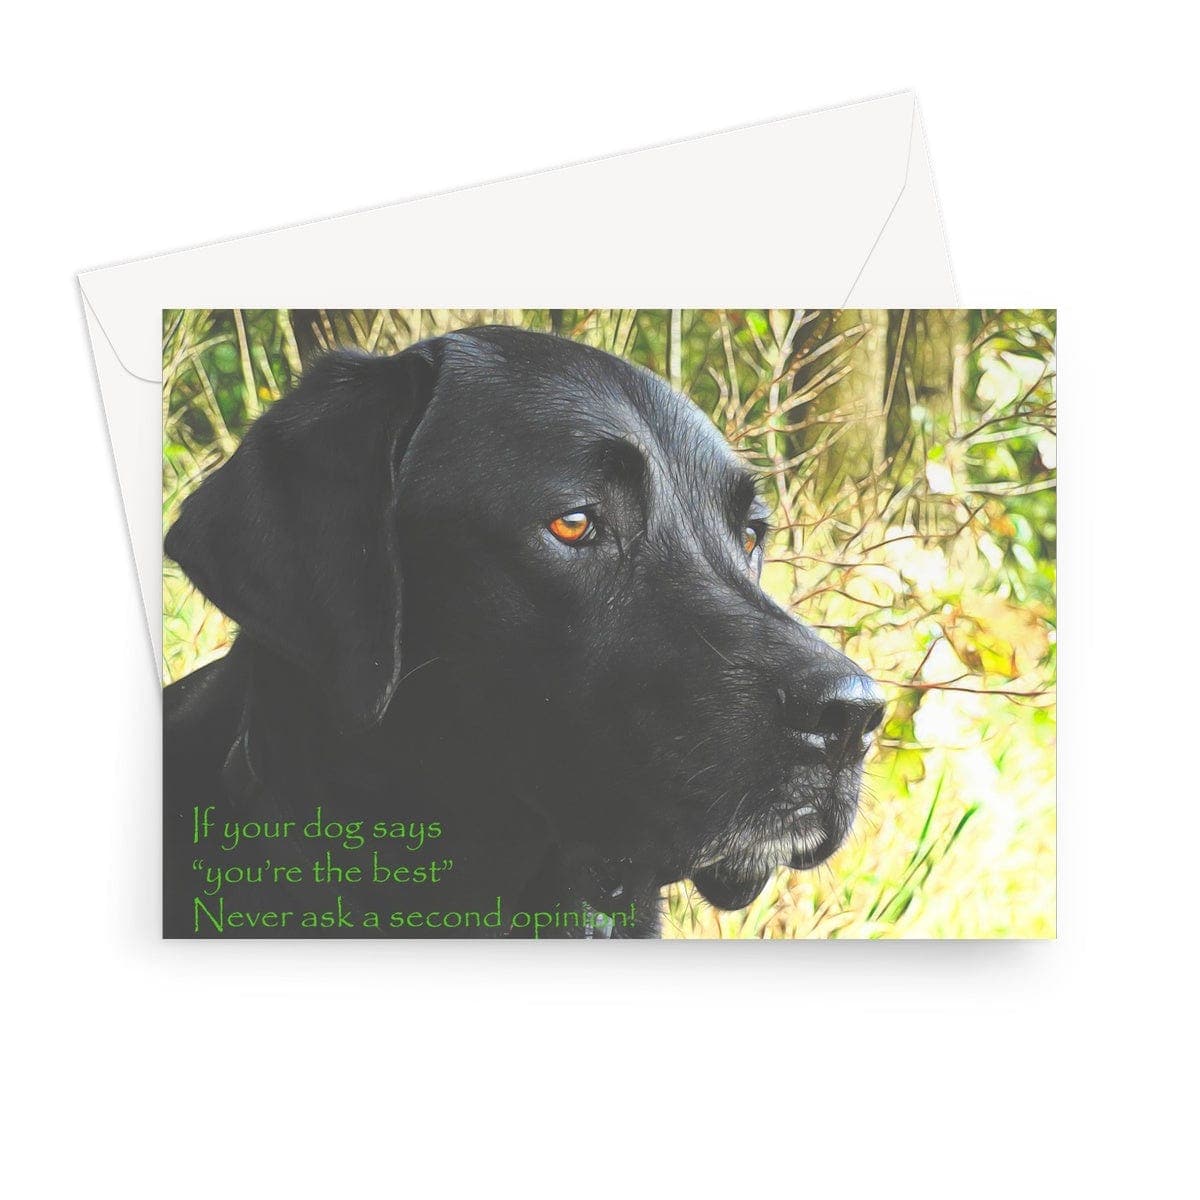 If your dog says... Art on a Greeting Card, by Sensus Studio